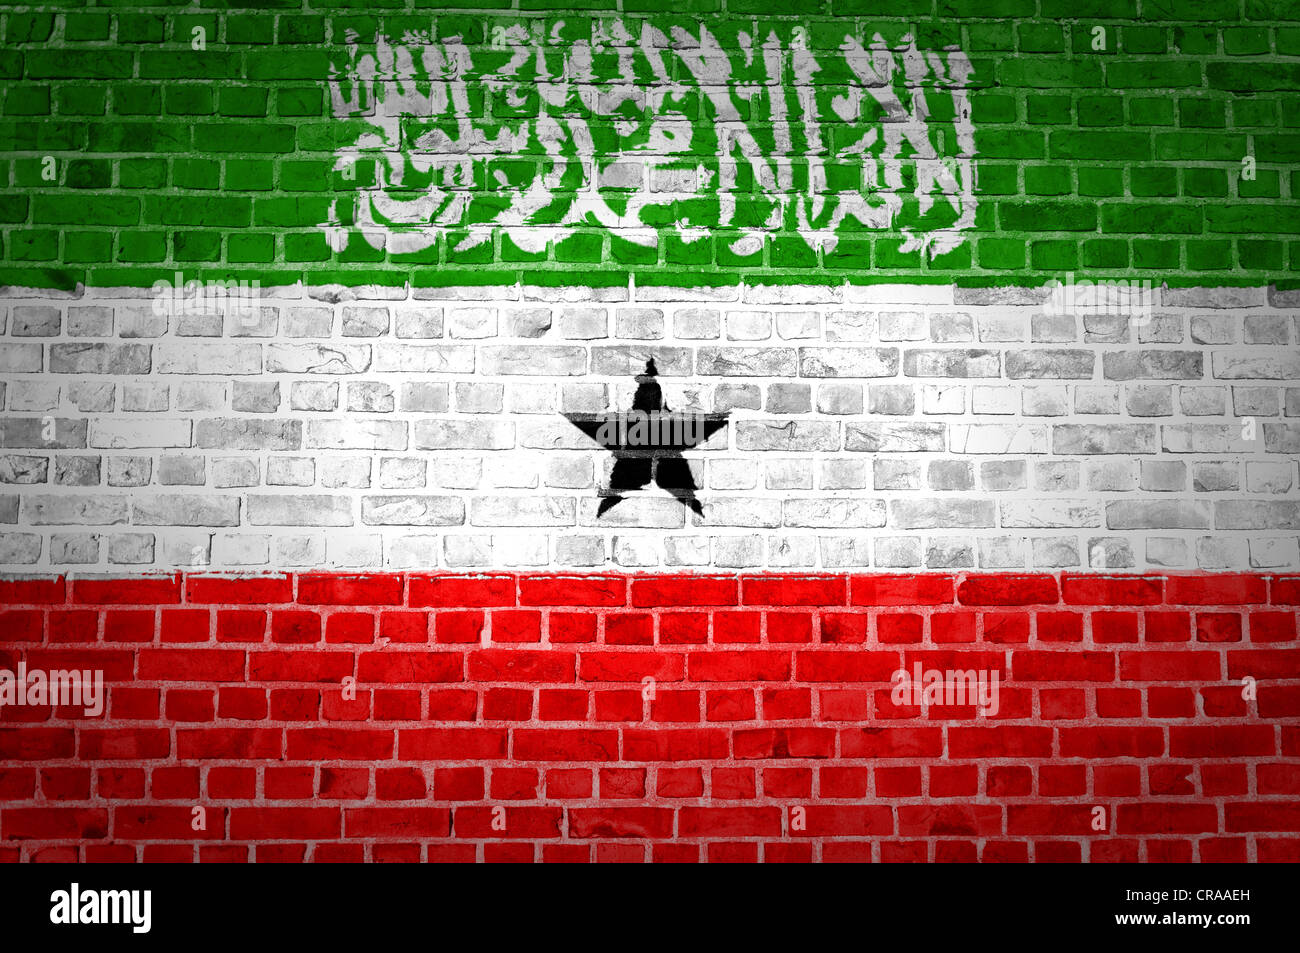 An image of the Somaliland flag painted on a brick wall in an urban location Stock Photo